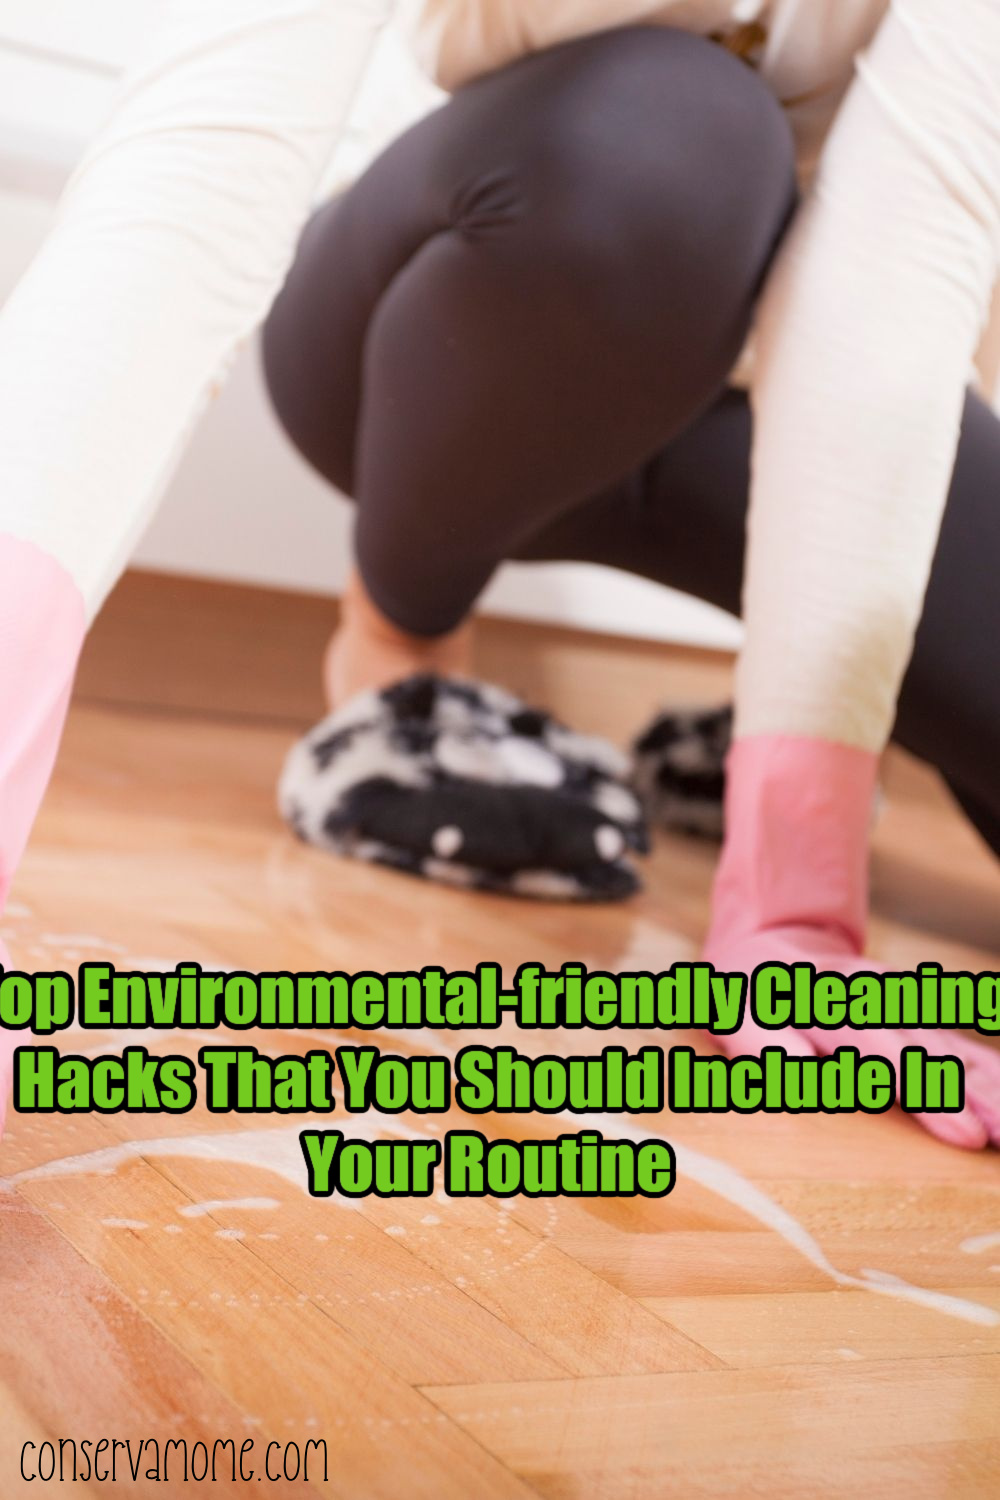 Environmental-friendly Cleaning Hacks You Should Use in your routine